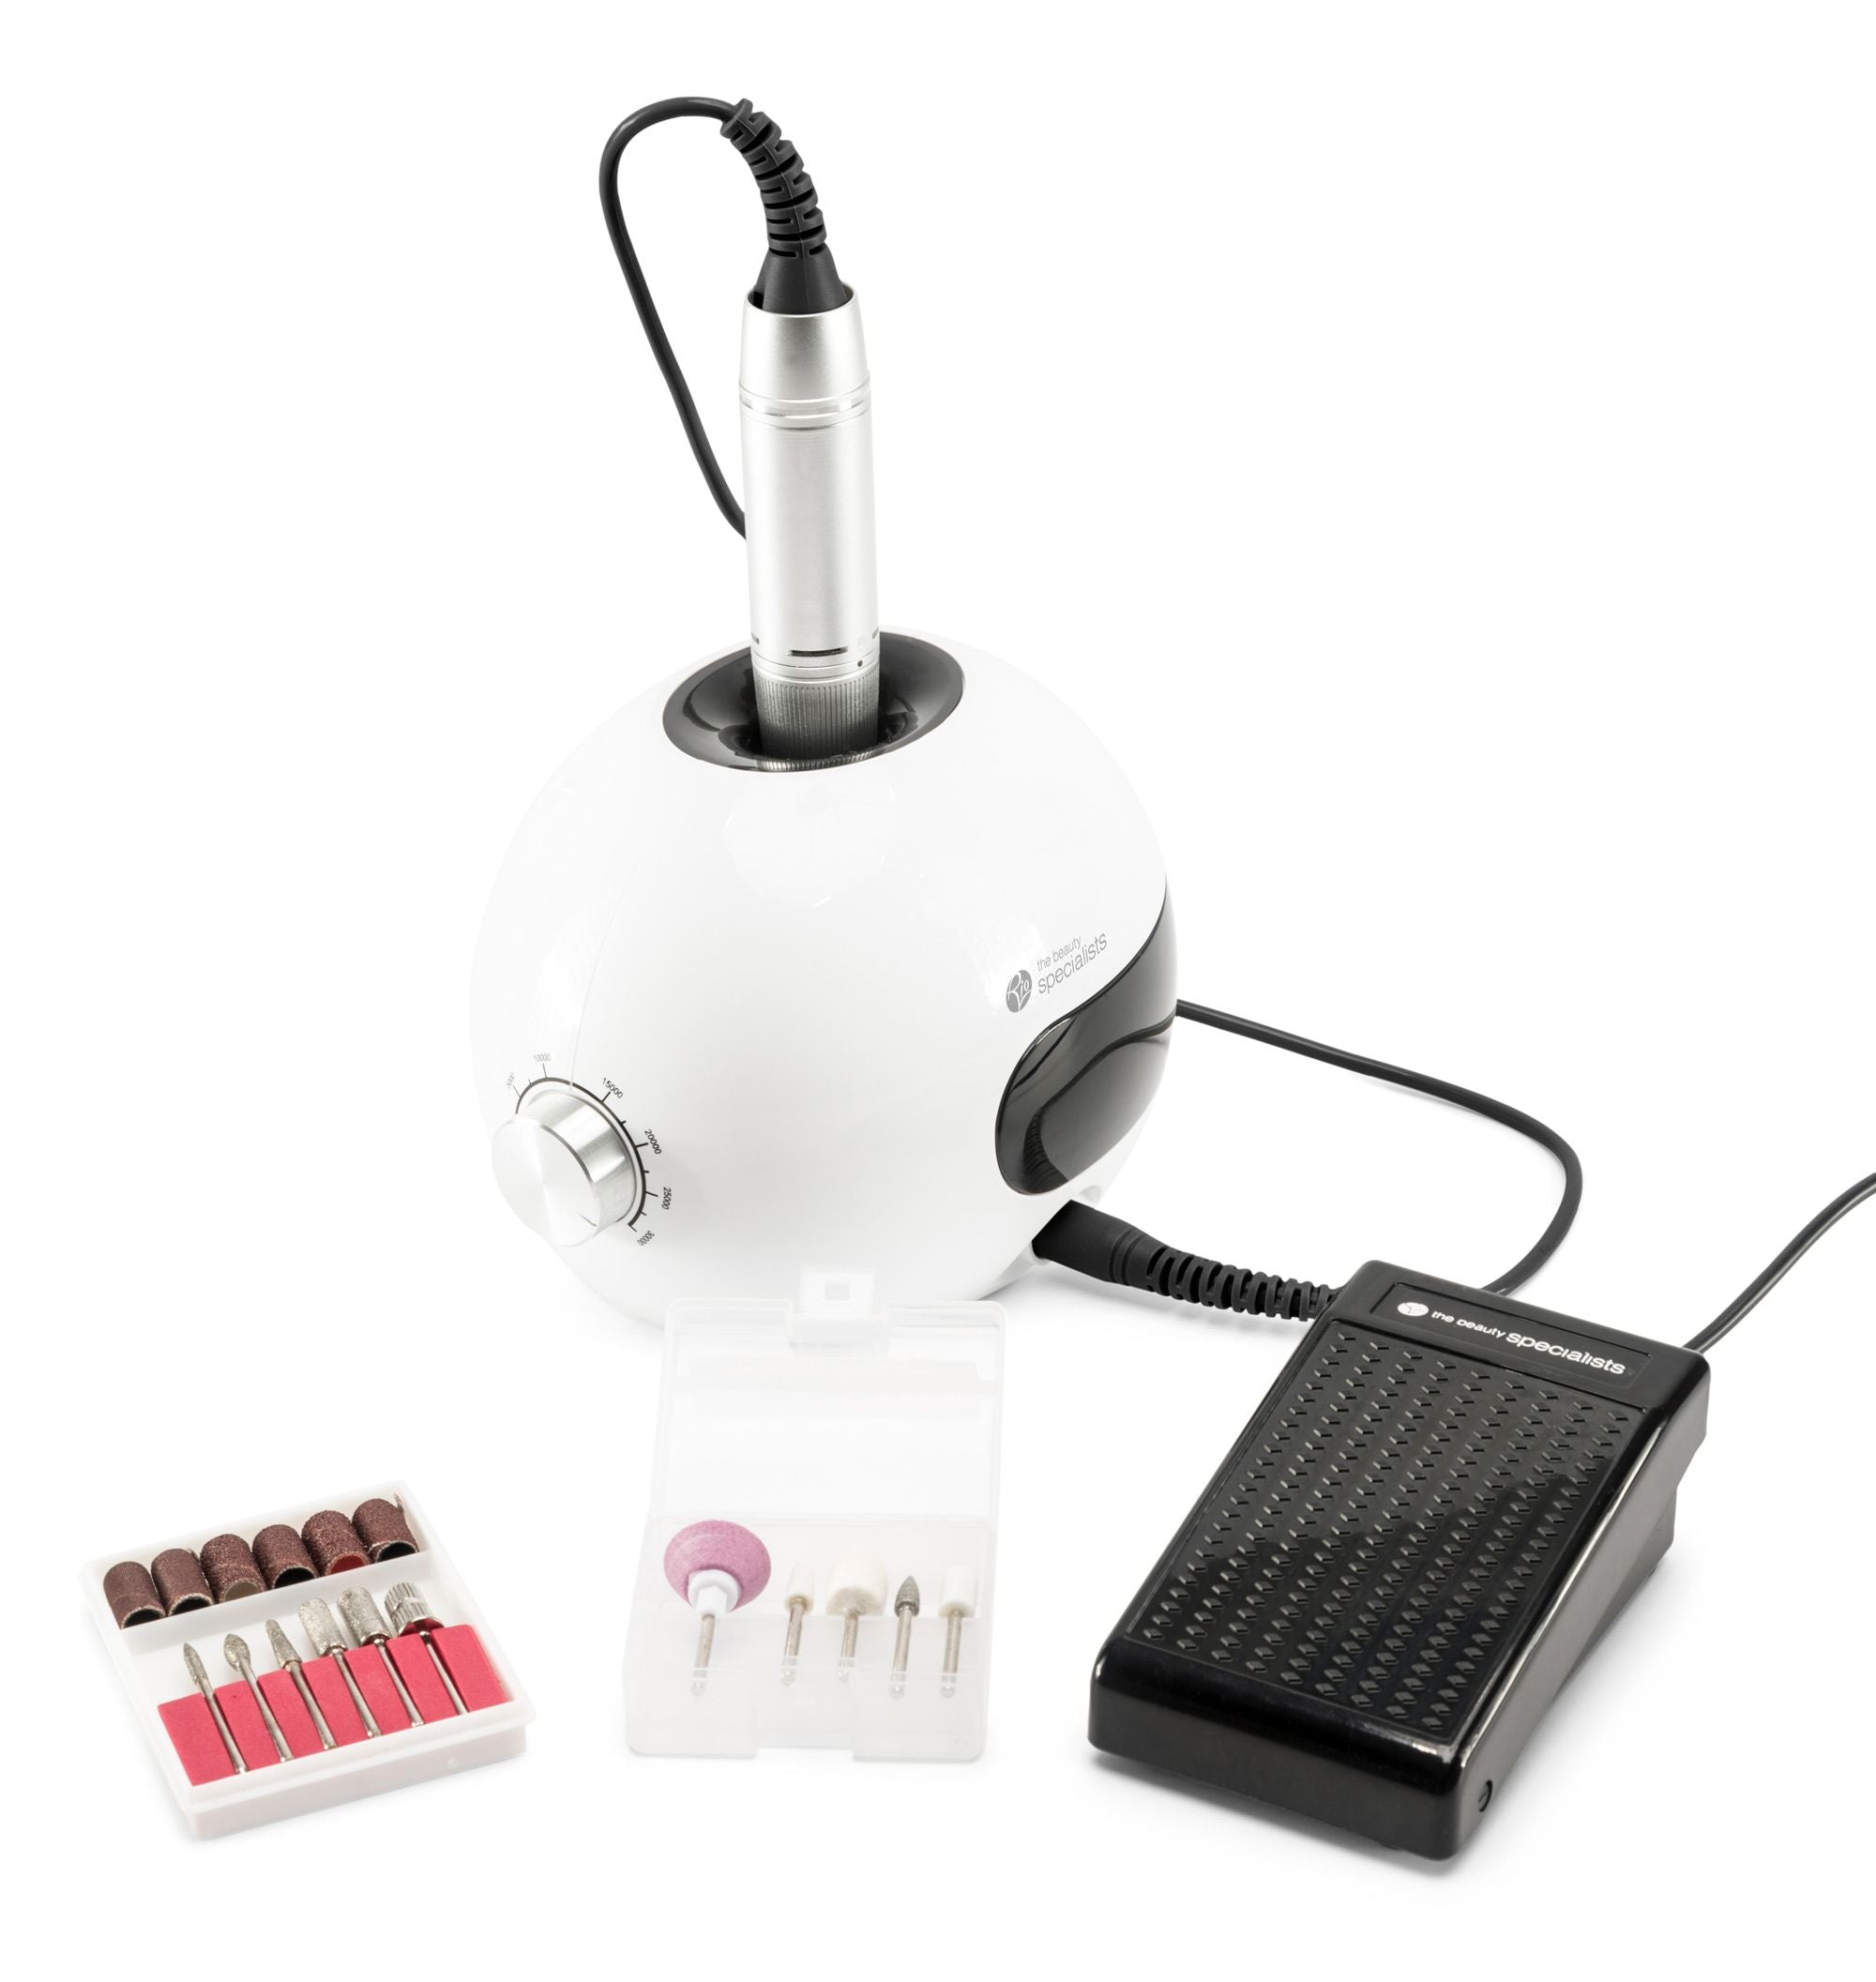 Salon electric nail file with foot pedal control and 11 interchangeable drill heads